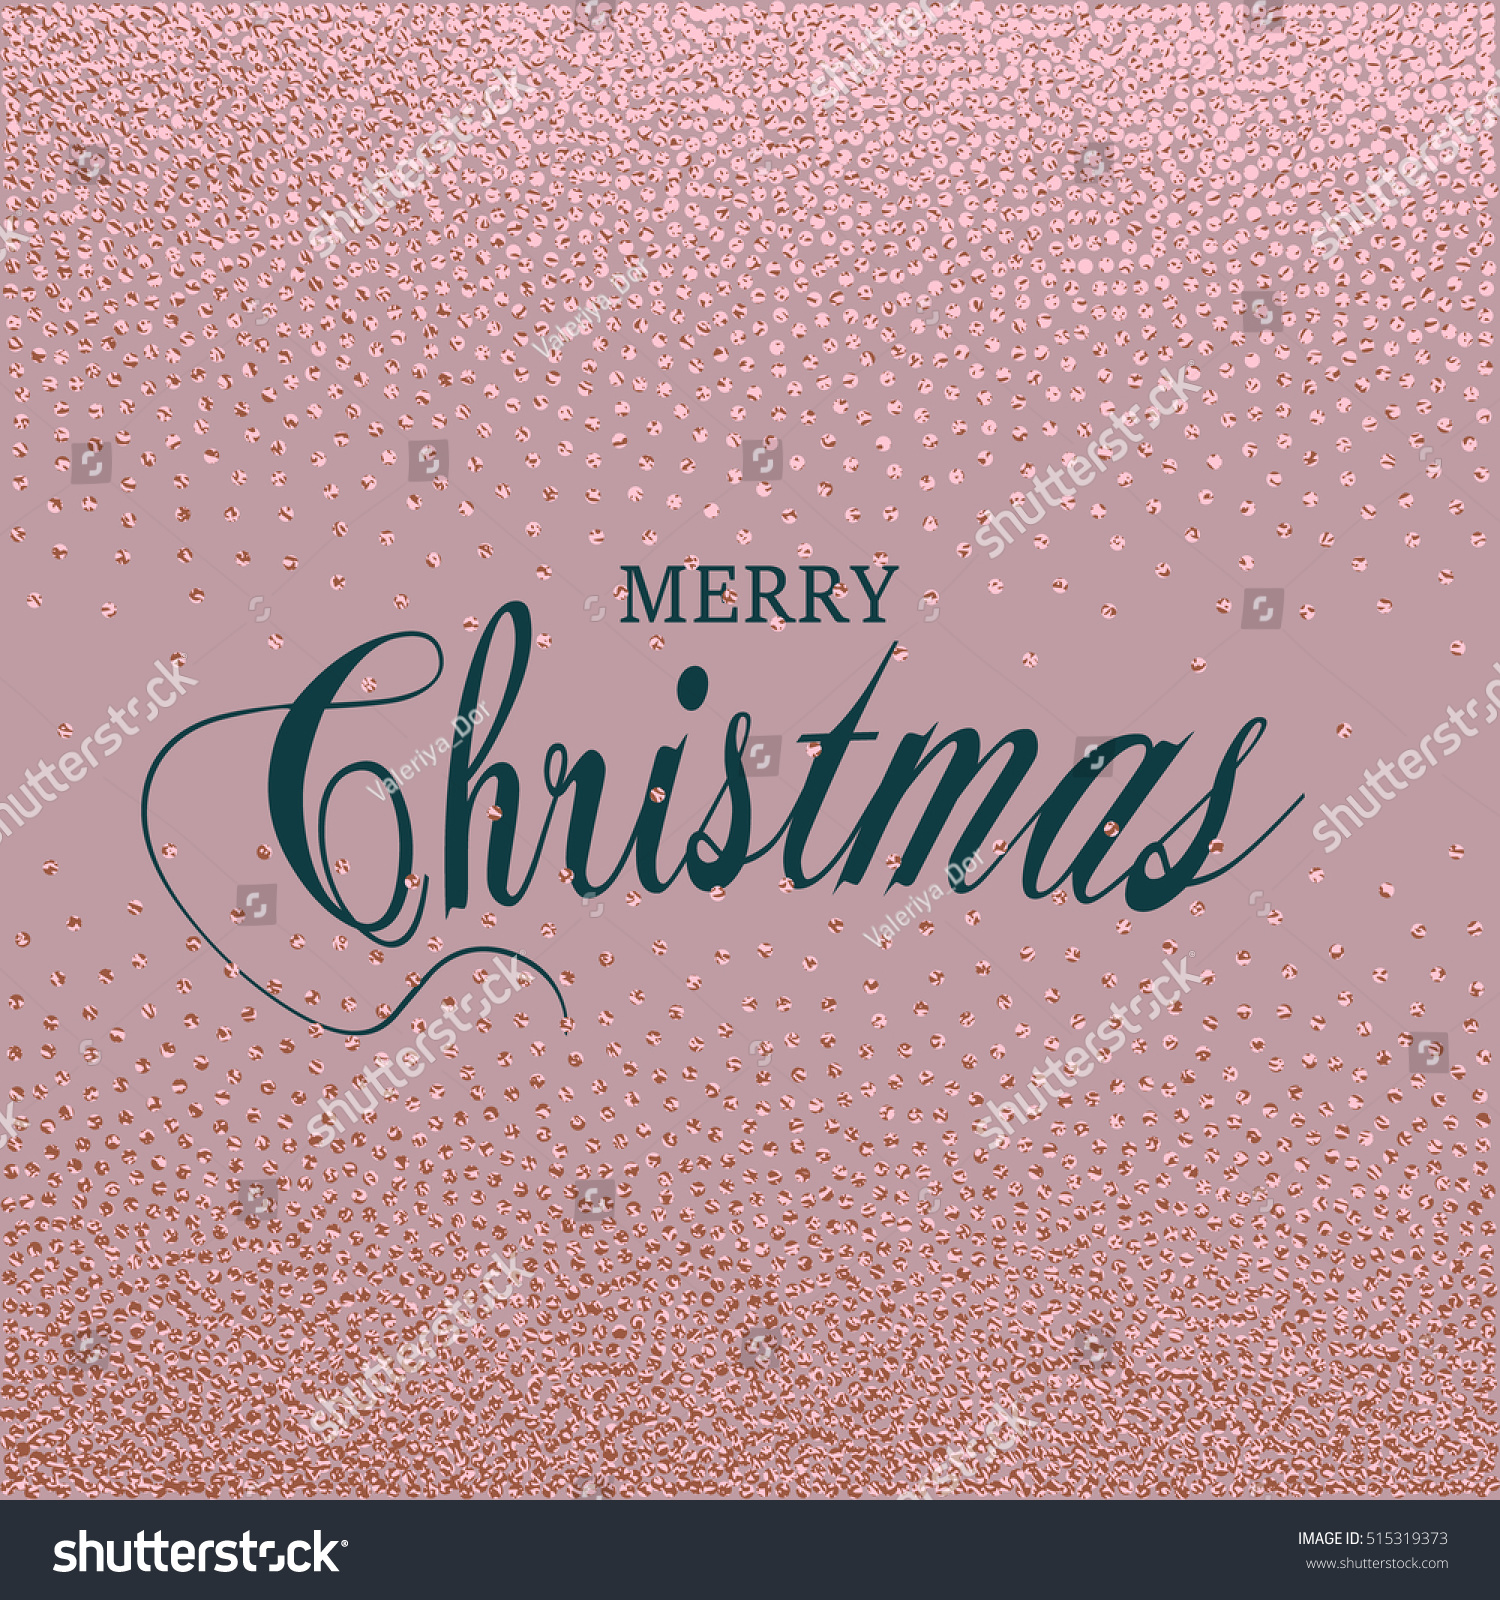 SVG of Merry Christmas. Metallic glossy texture. Metal rose quartz pattern. Abstract shiny background. Luxury sparkling background for greeting cards, posters, typography. svg